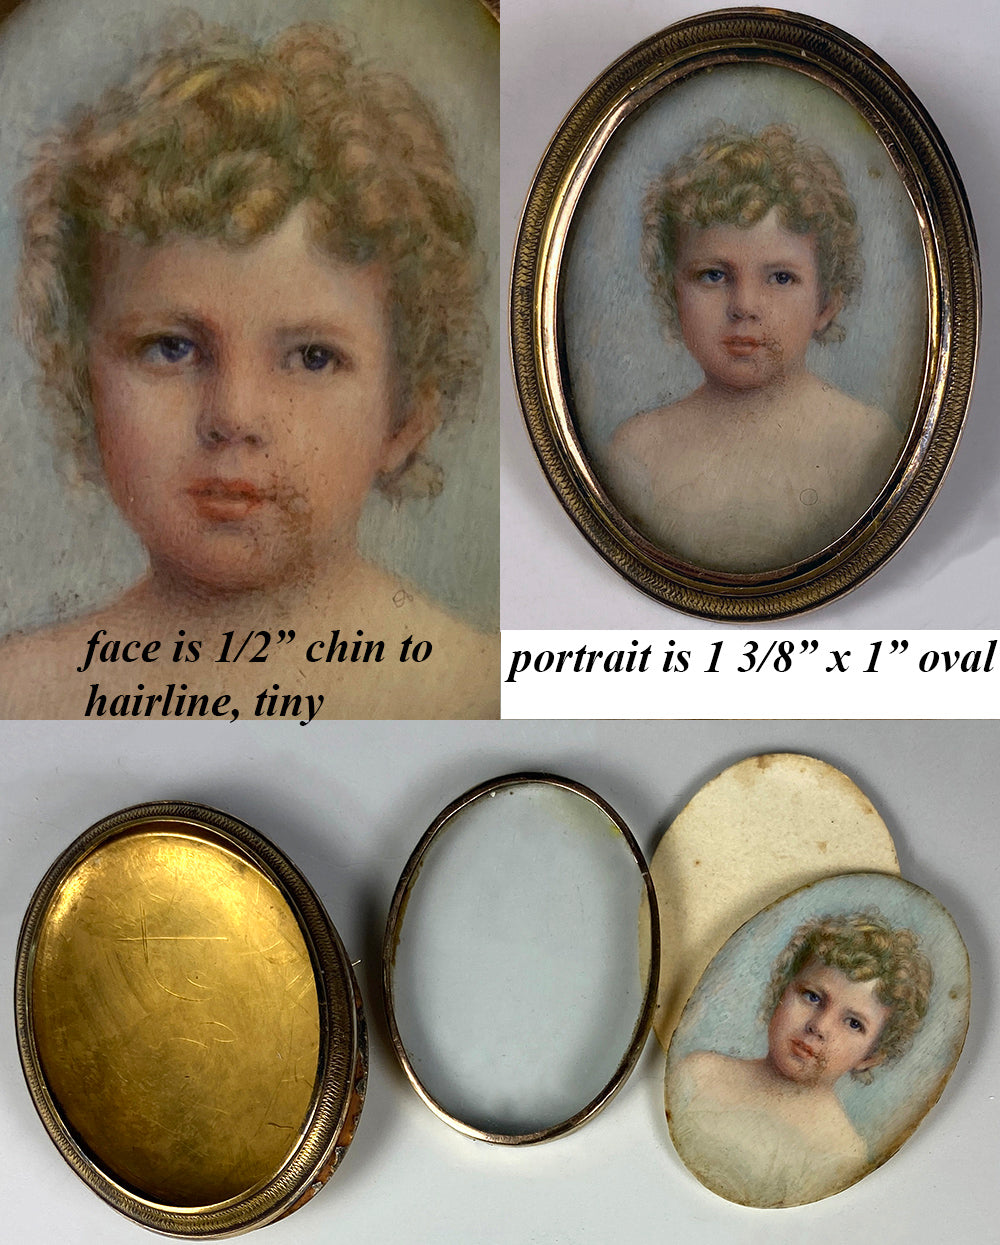 Antique English Portrait Miniature, Blond Child or Baby, 12k 14k Pendant or Brooch